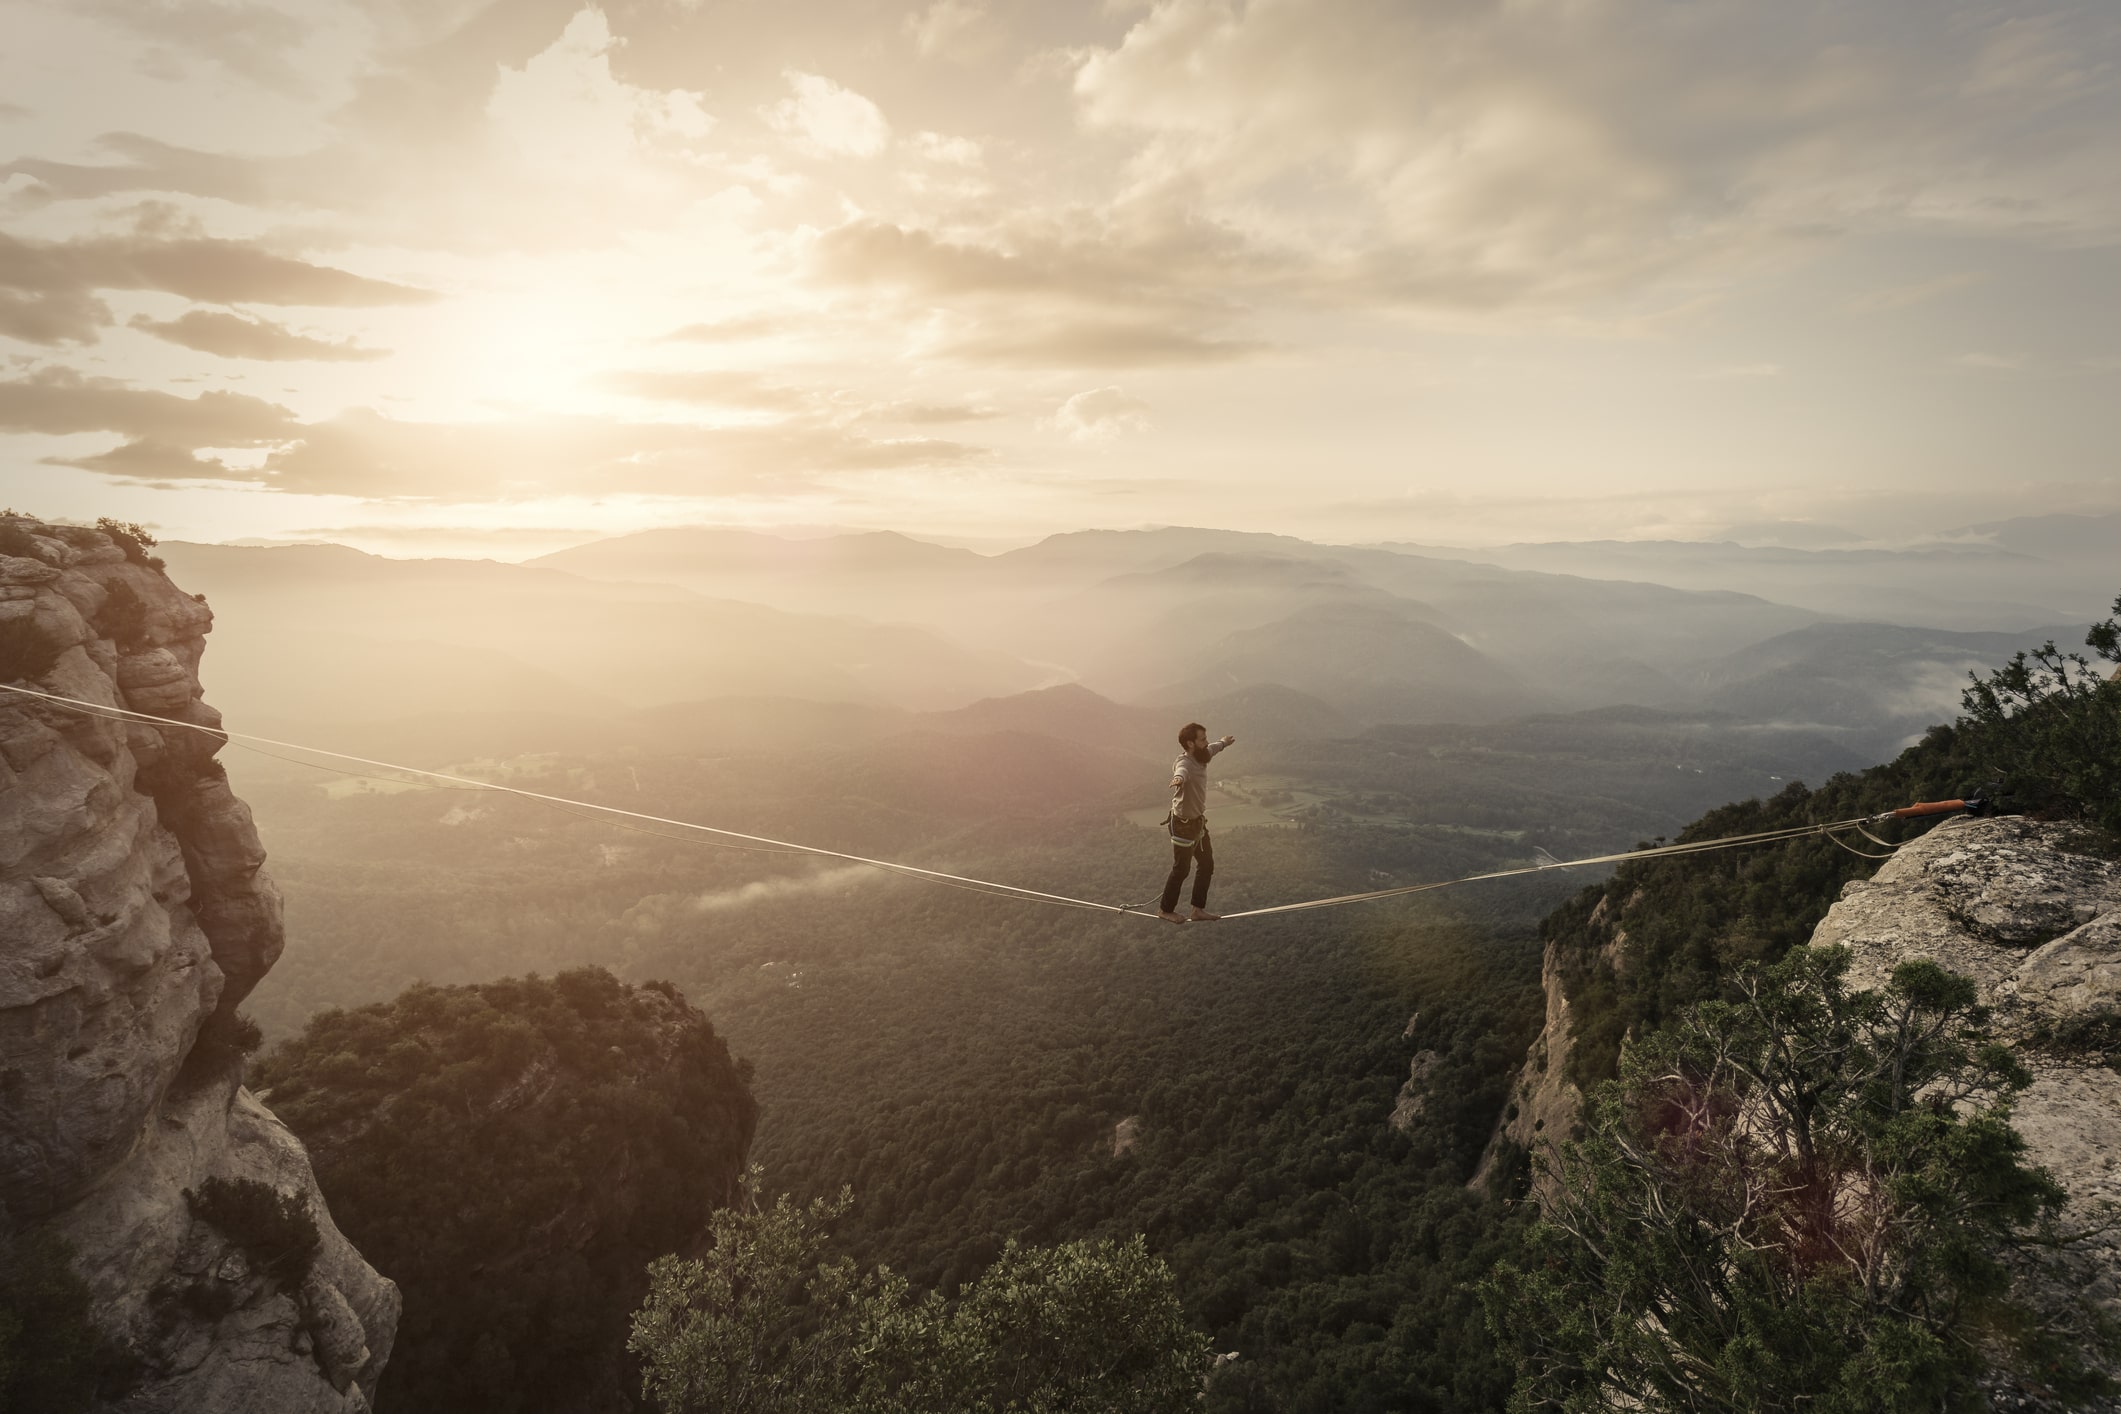 A person slacklining over a vast landscape, evoking the theme of work-life balance